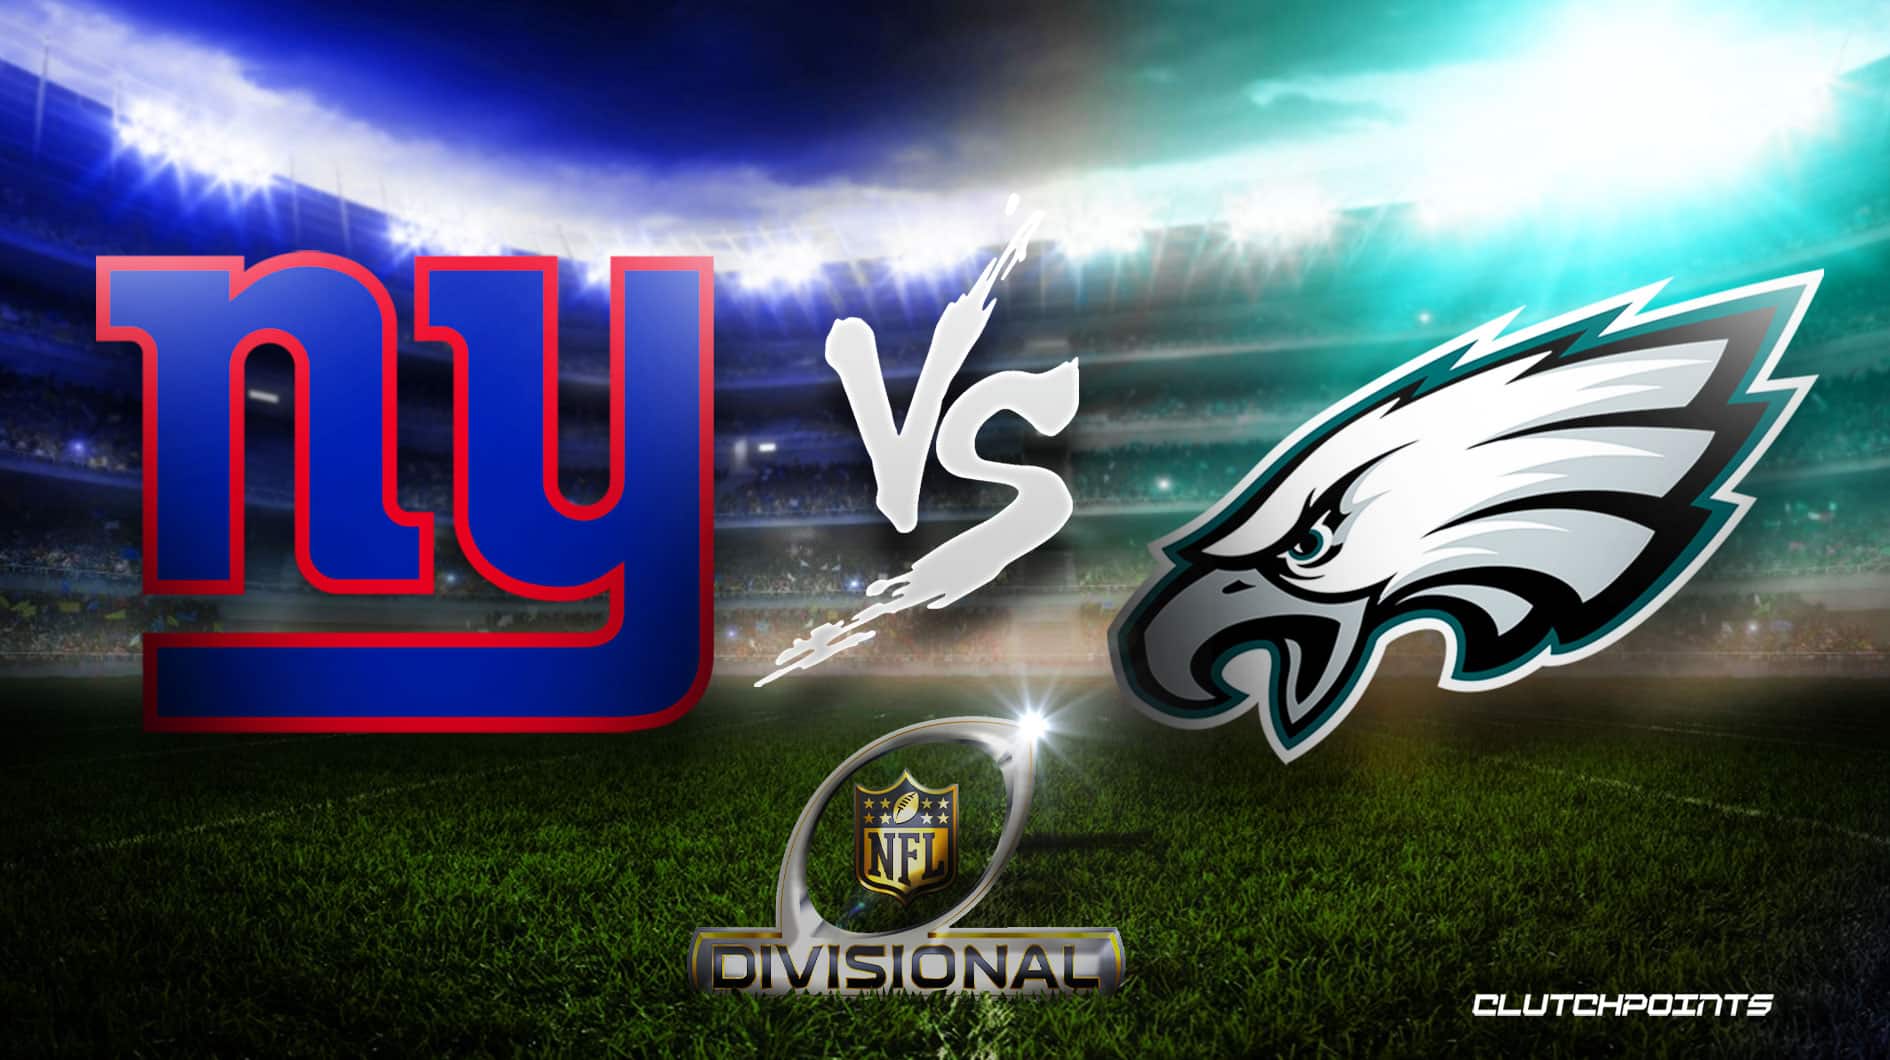 Giants vs. Eagles prediction, betting odds for NFL Divisional Round 